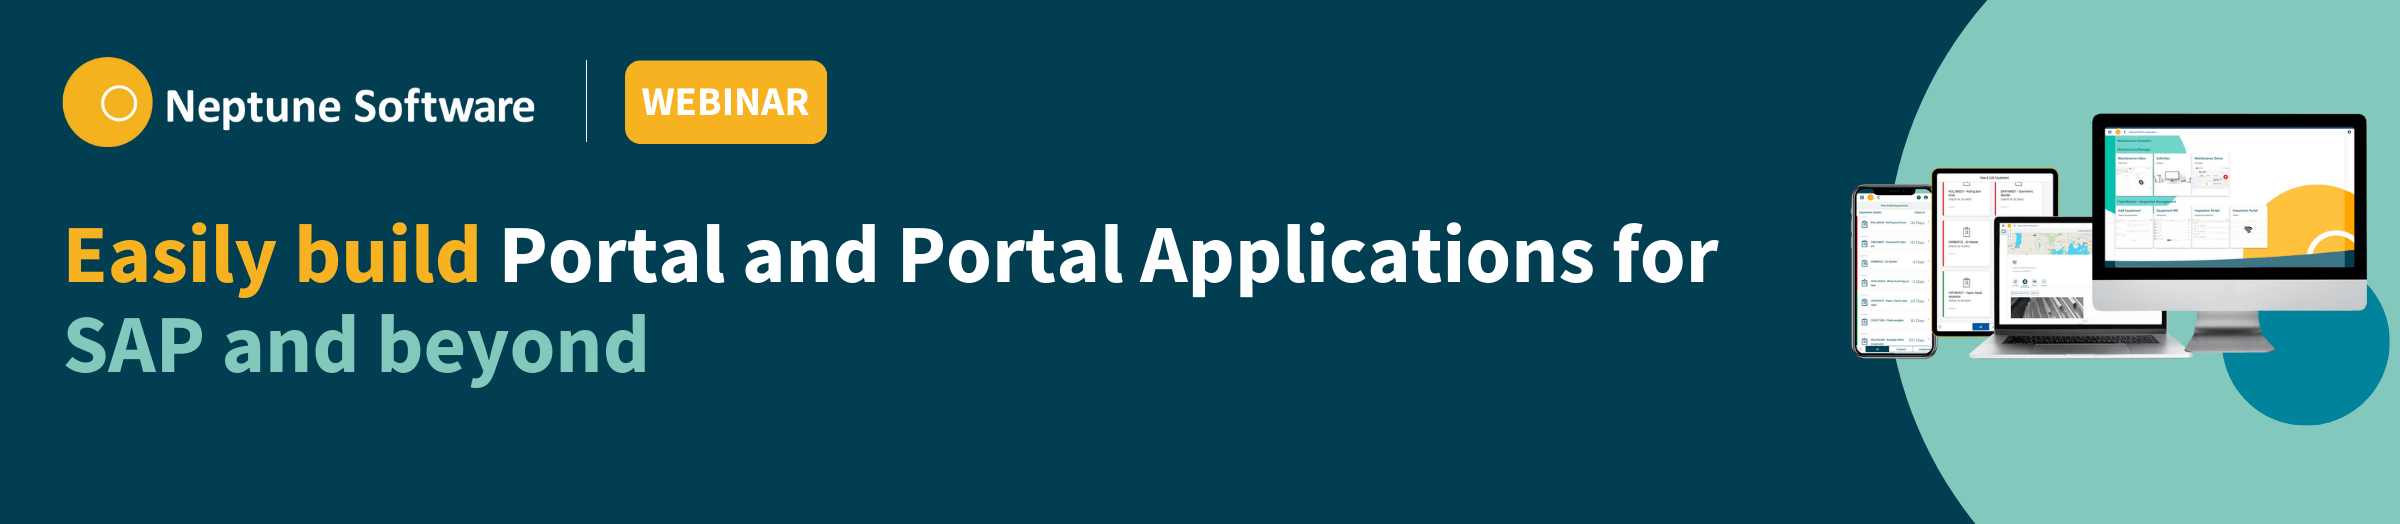 Easily build portal and portal applications for SAP and beyond 